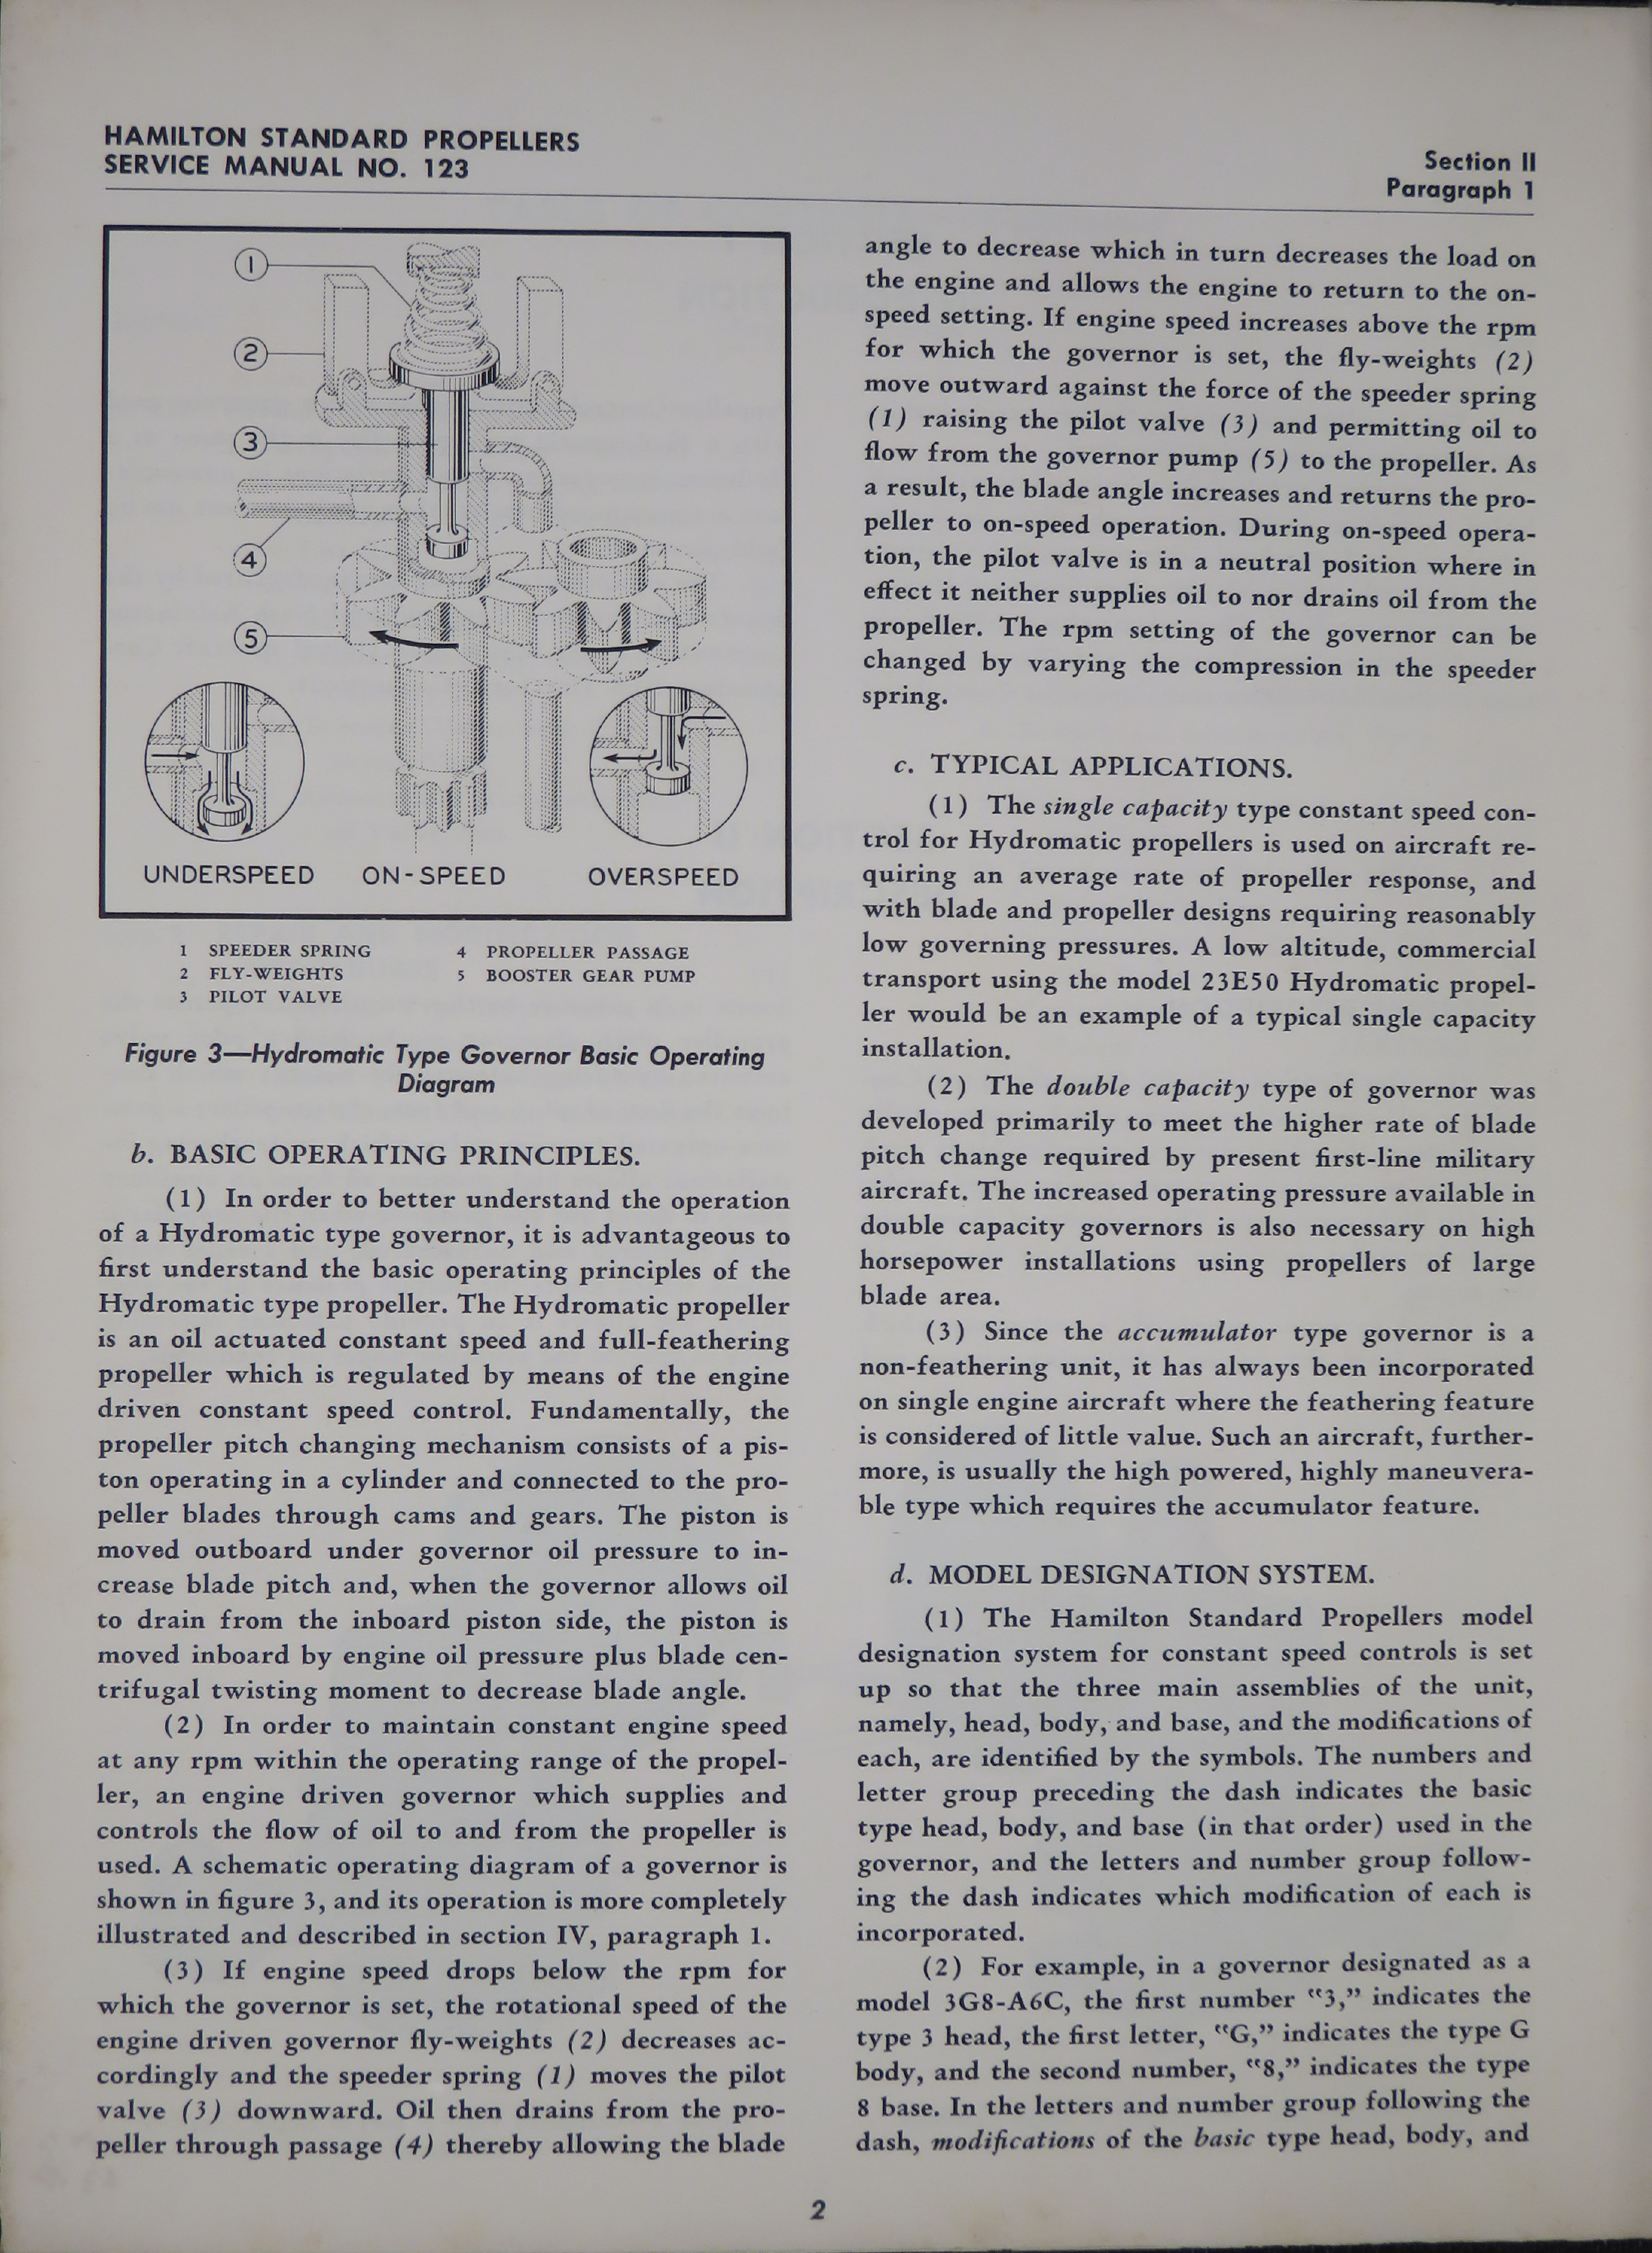 Sample page 8 from AirCorps Library document: Service Manual for Hydromatic Propeller Governors